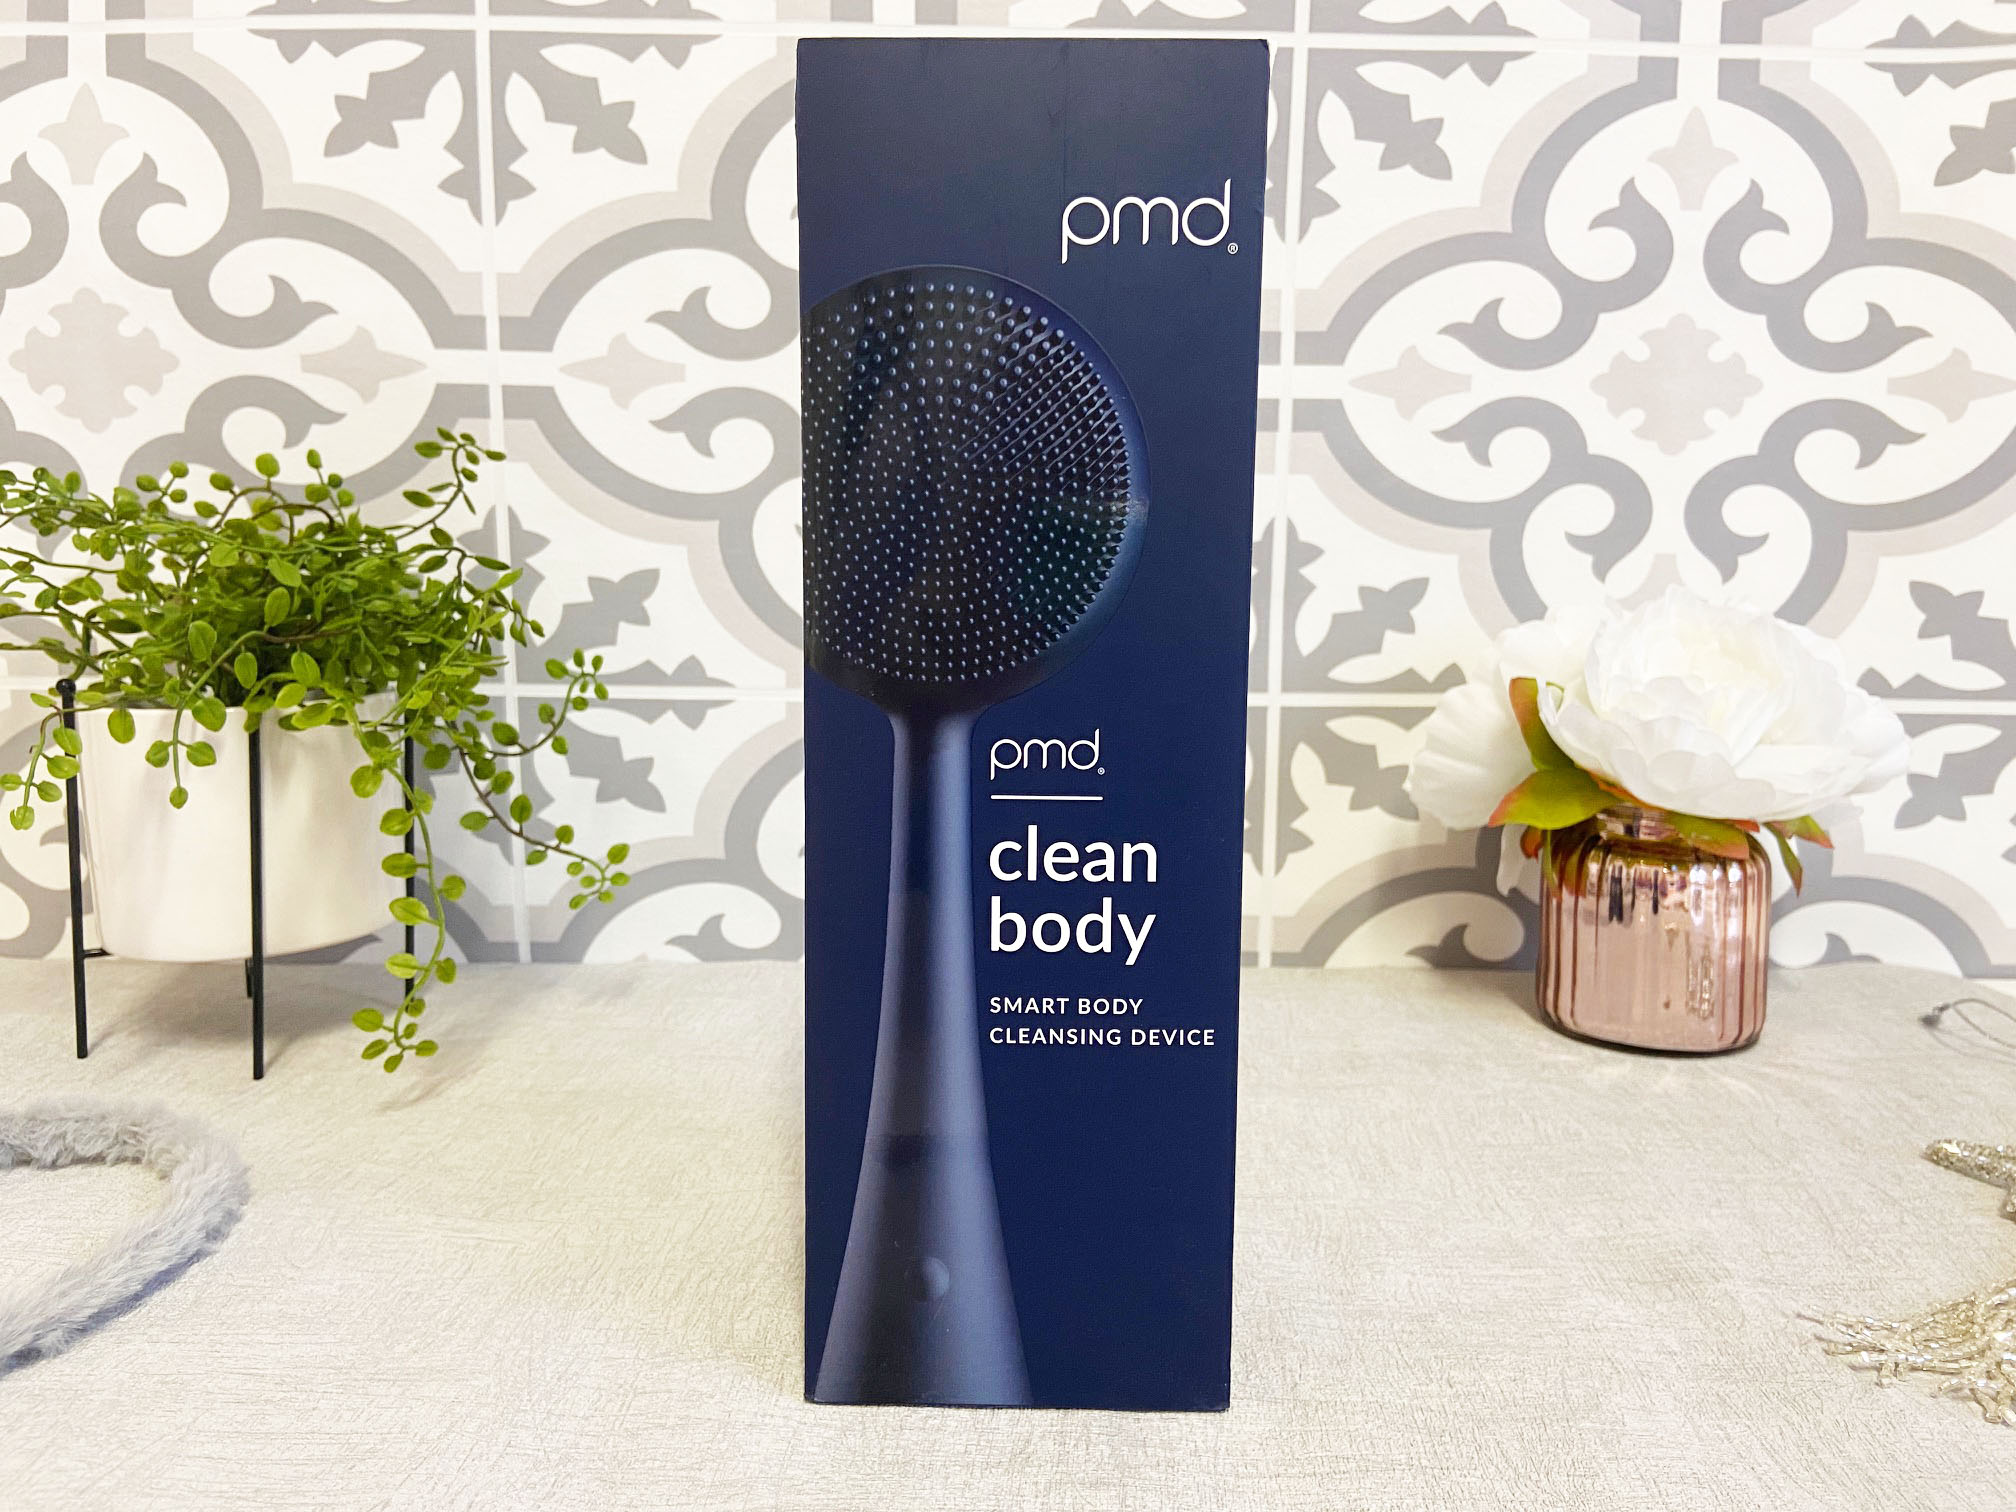 pmd Clean Body Smart Body Cleansing Device Review | Kathryn's Loves